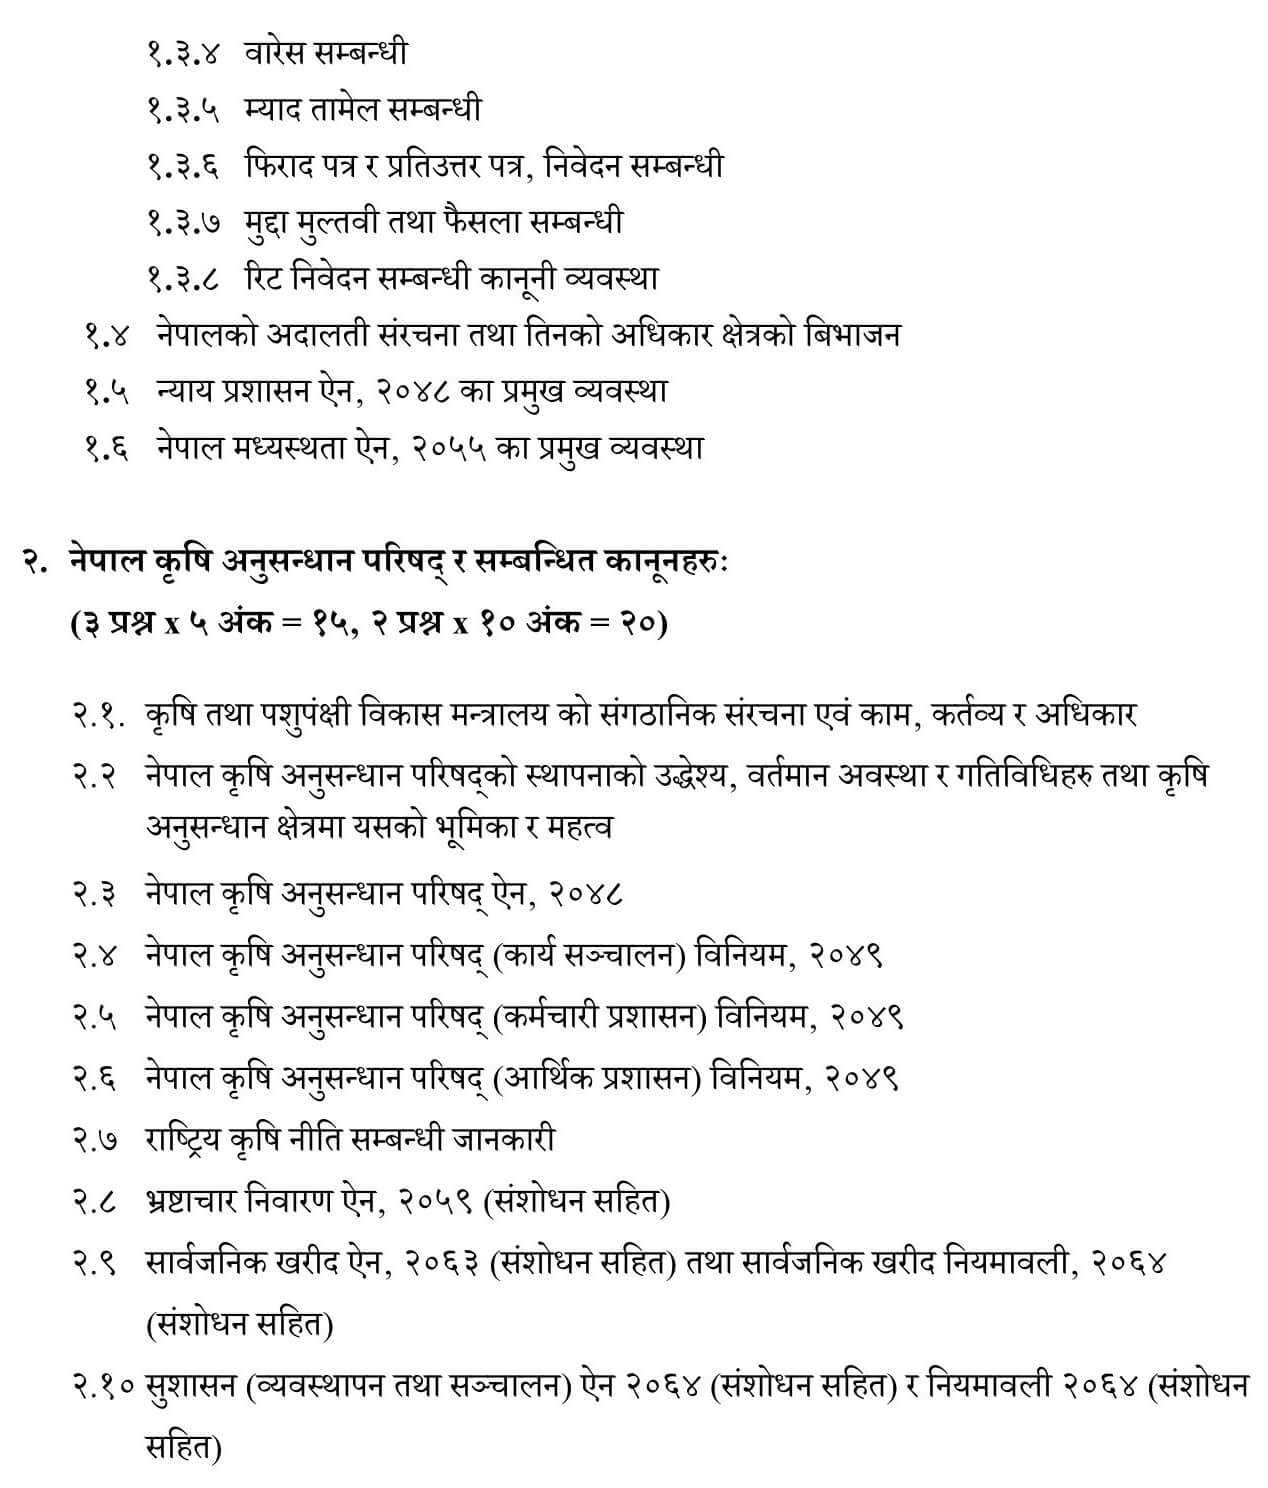 Nepal Agricultural Research Council Level 5 Legal Assistant Syllabus. NARC Level 5 Legal Assistant Syllabus. NARC Syllabus PDF.